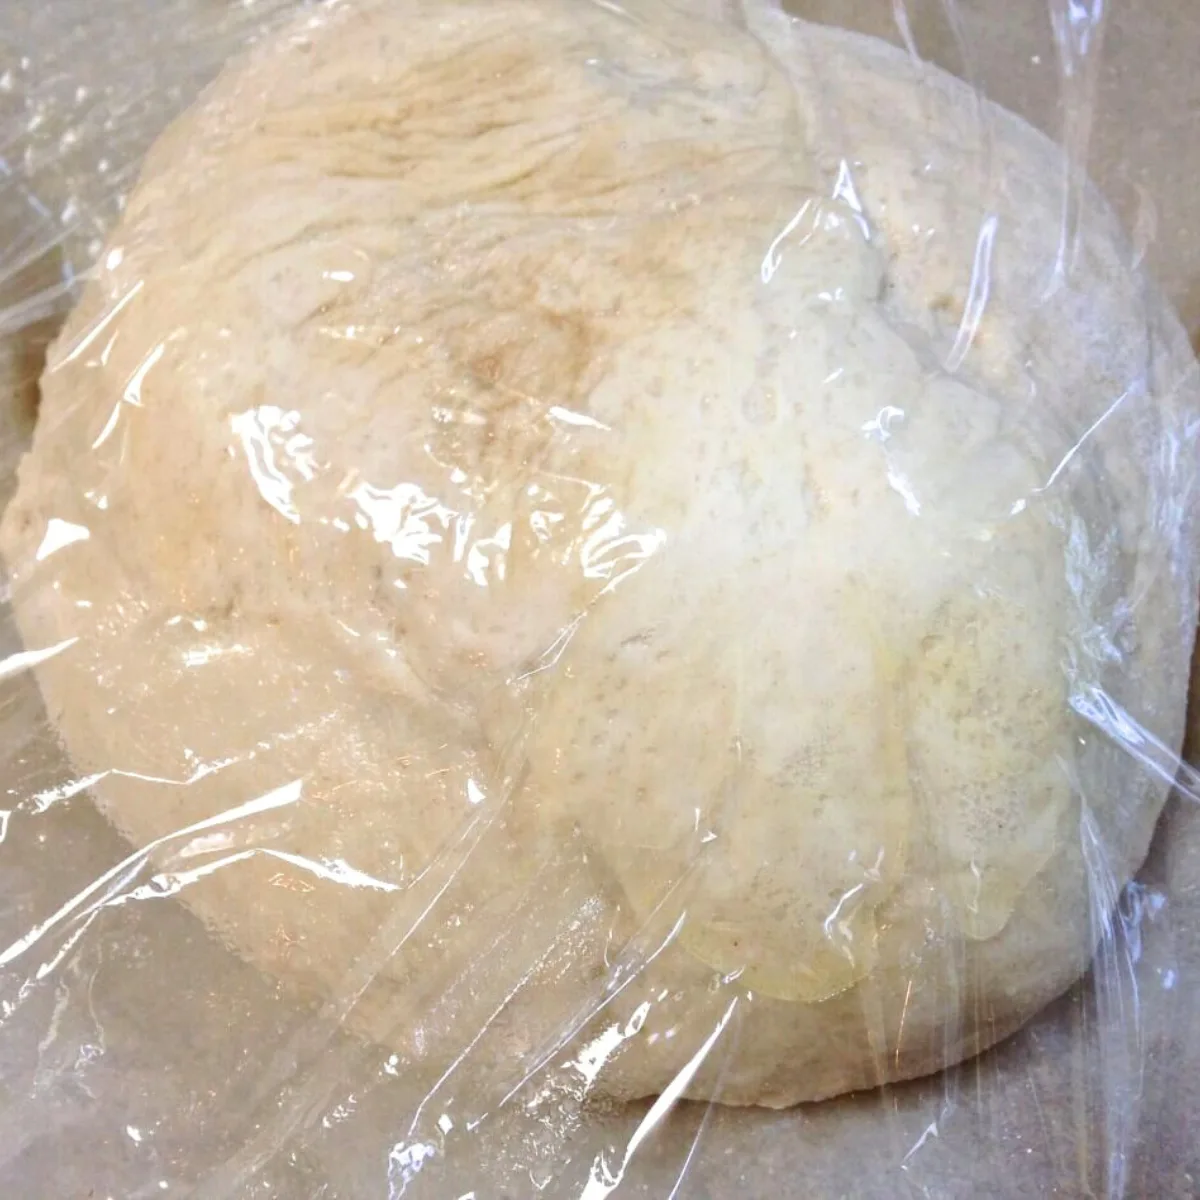 A ball of bread dough covered with plastic wrap